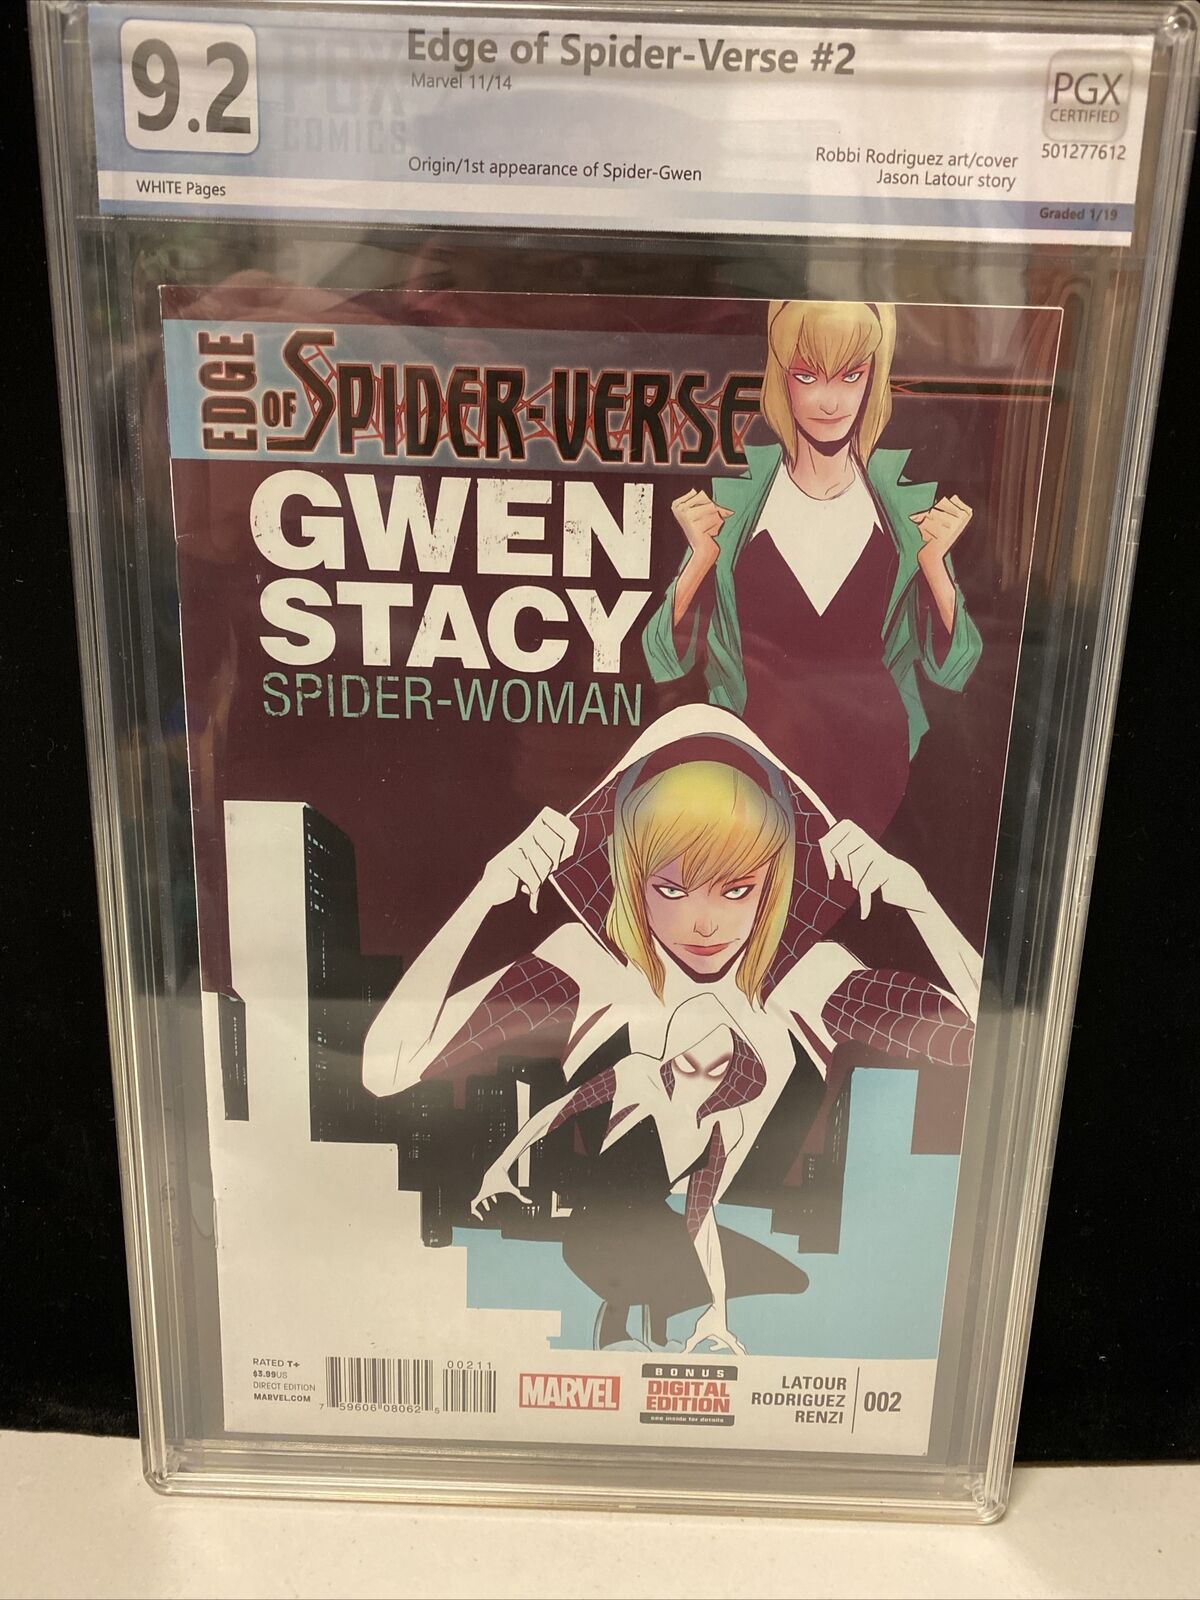 EDGE OF SPIDER-VERSE #2 Graded 9.2 NM- The First Appearance of Spider-Gwen